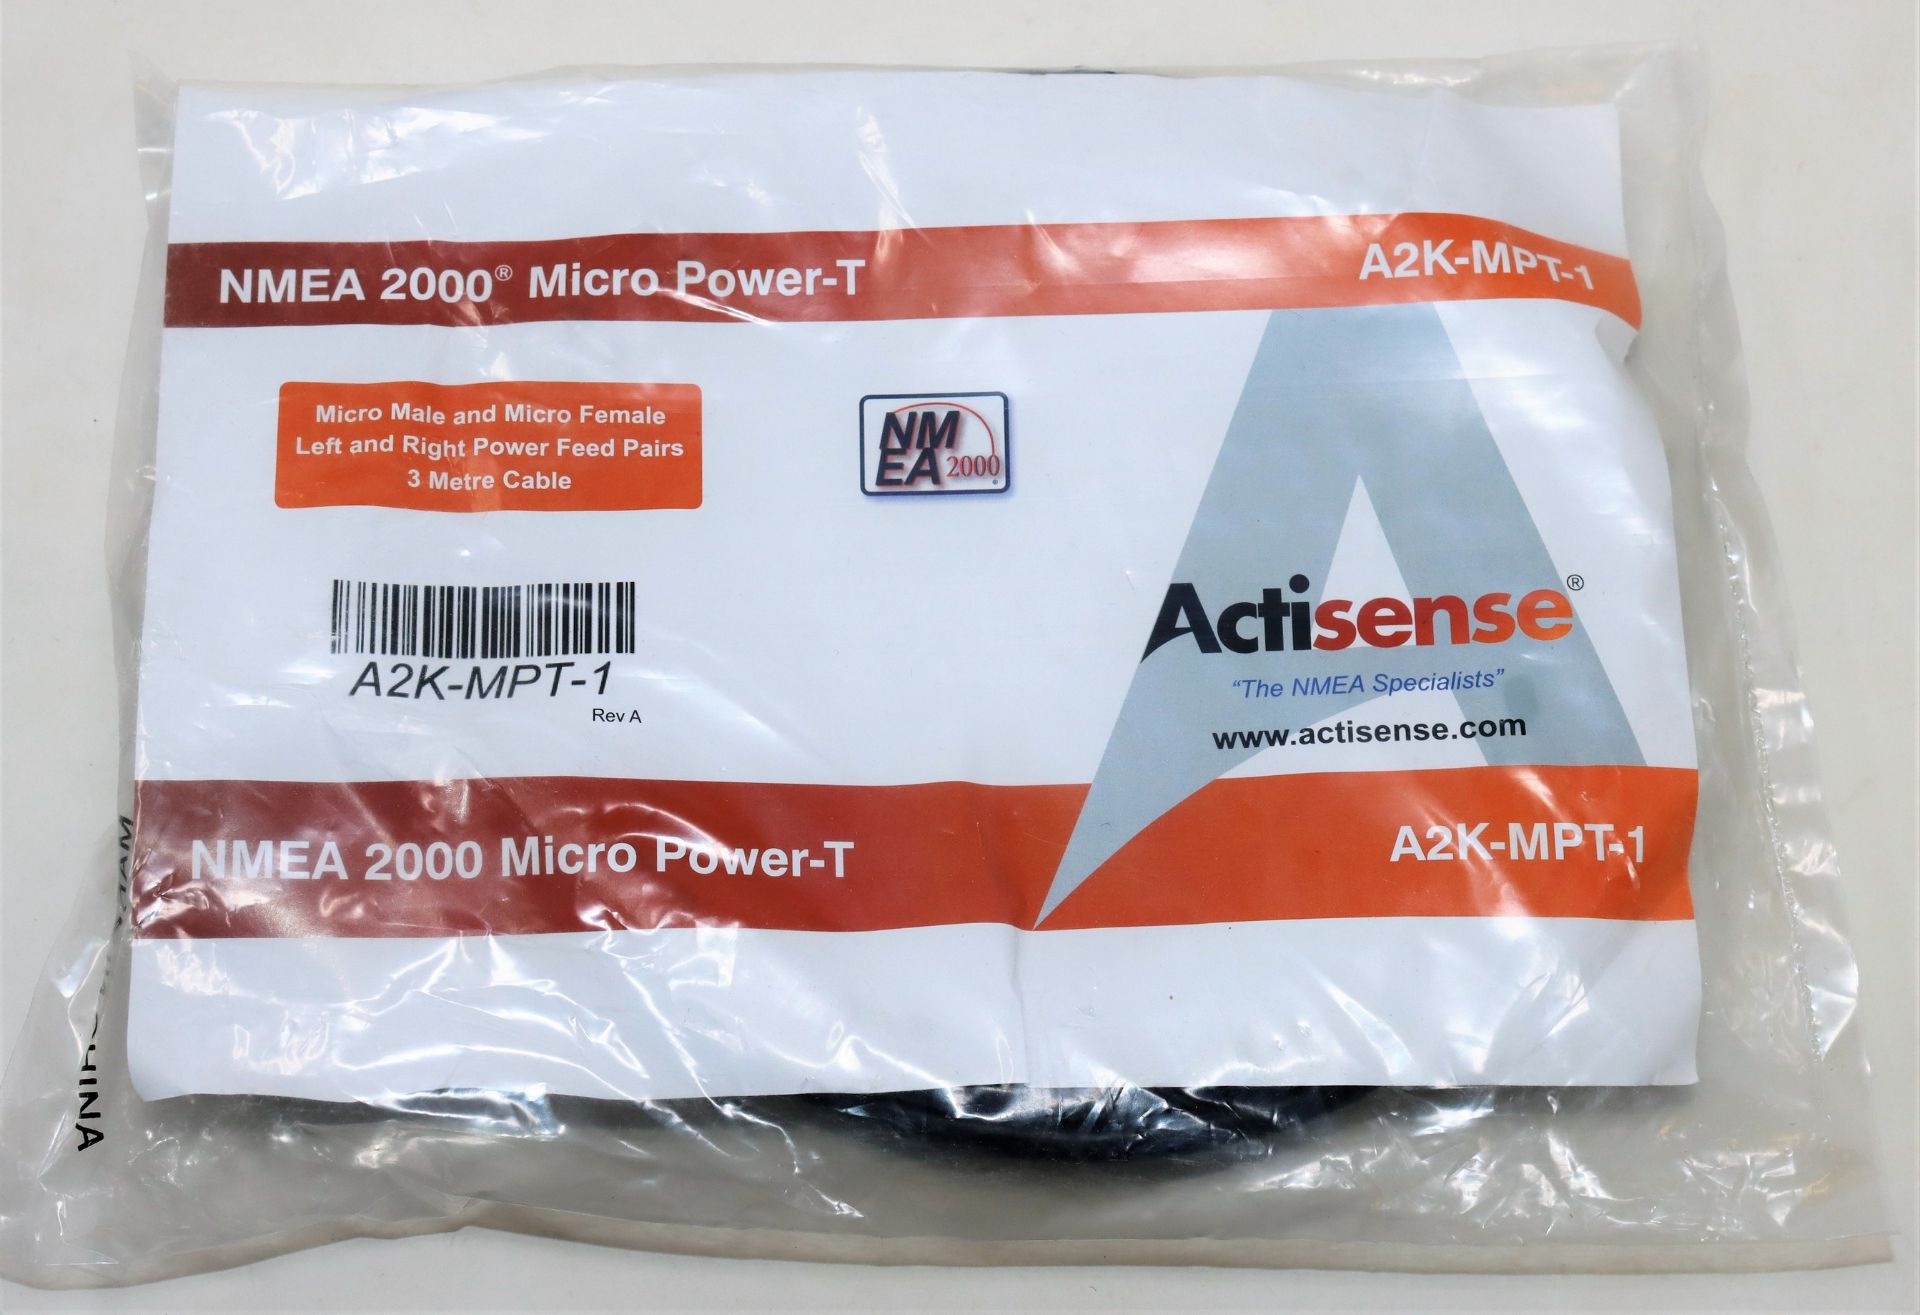 Six as new Actisense A2K-MPT-1 NMEA 2000 Micro Power-T 3M Cables (Packaging sealed).